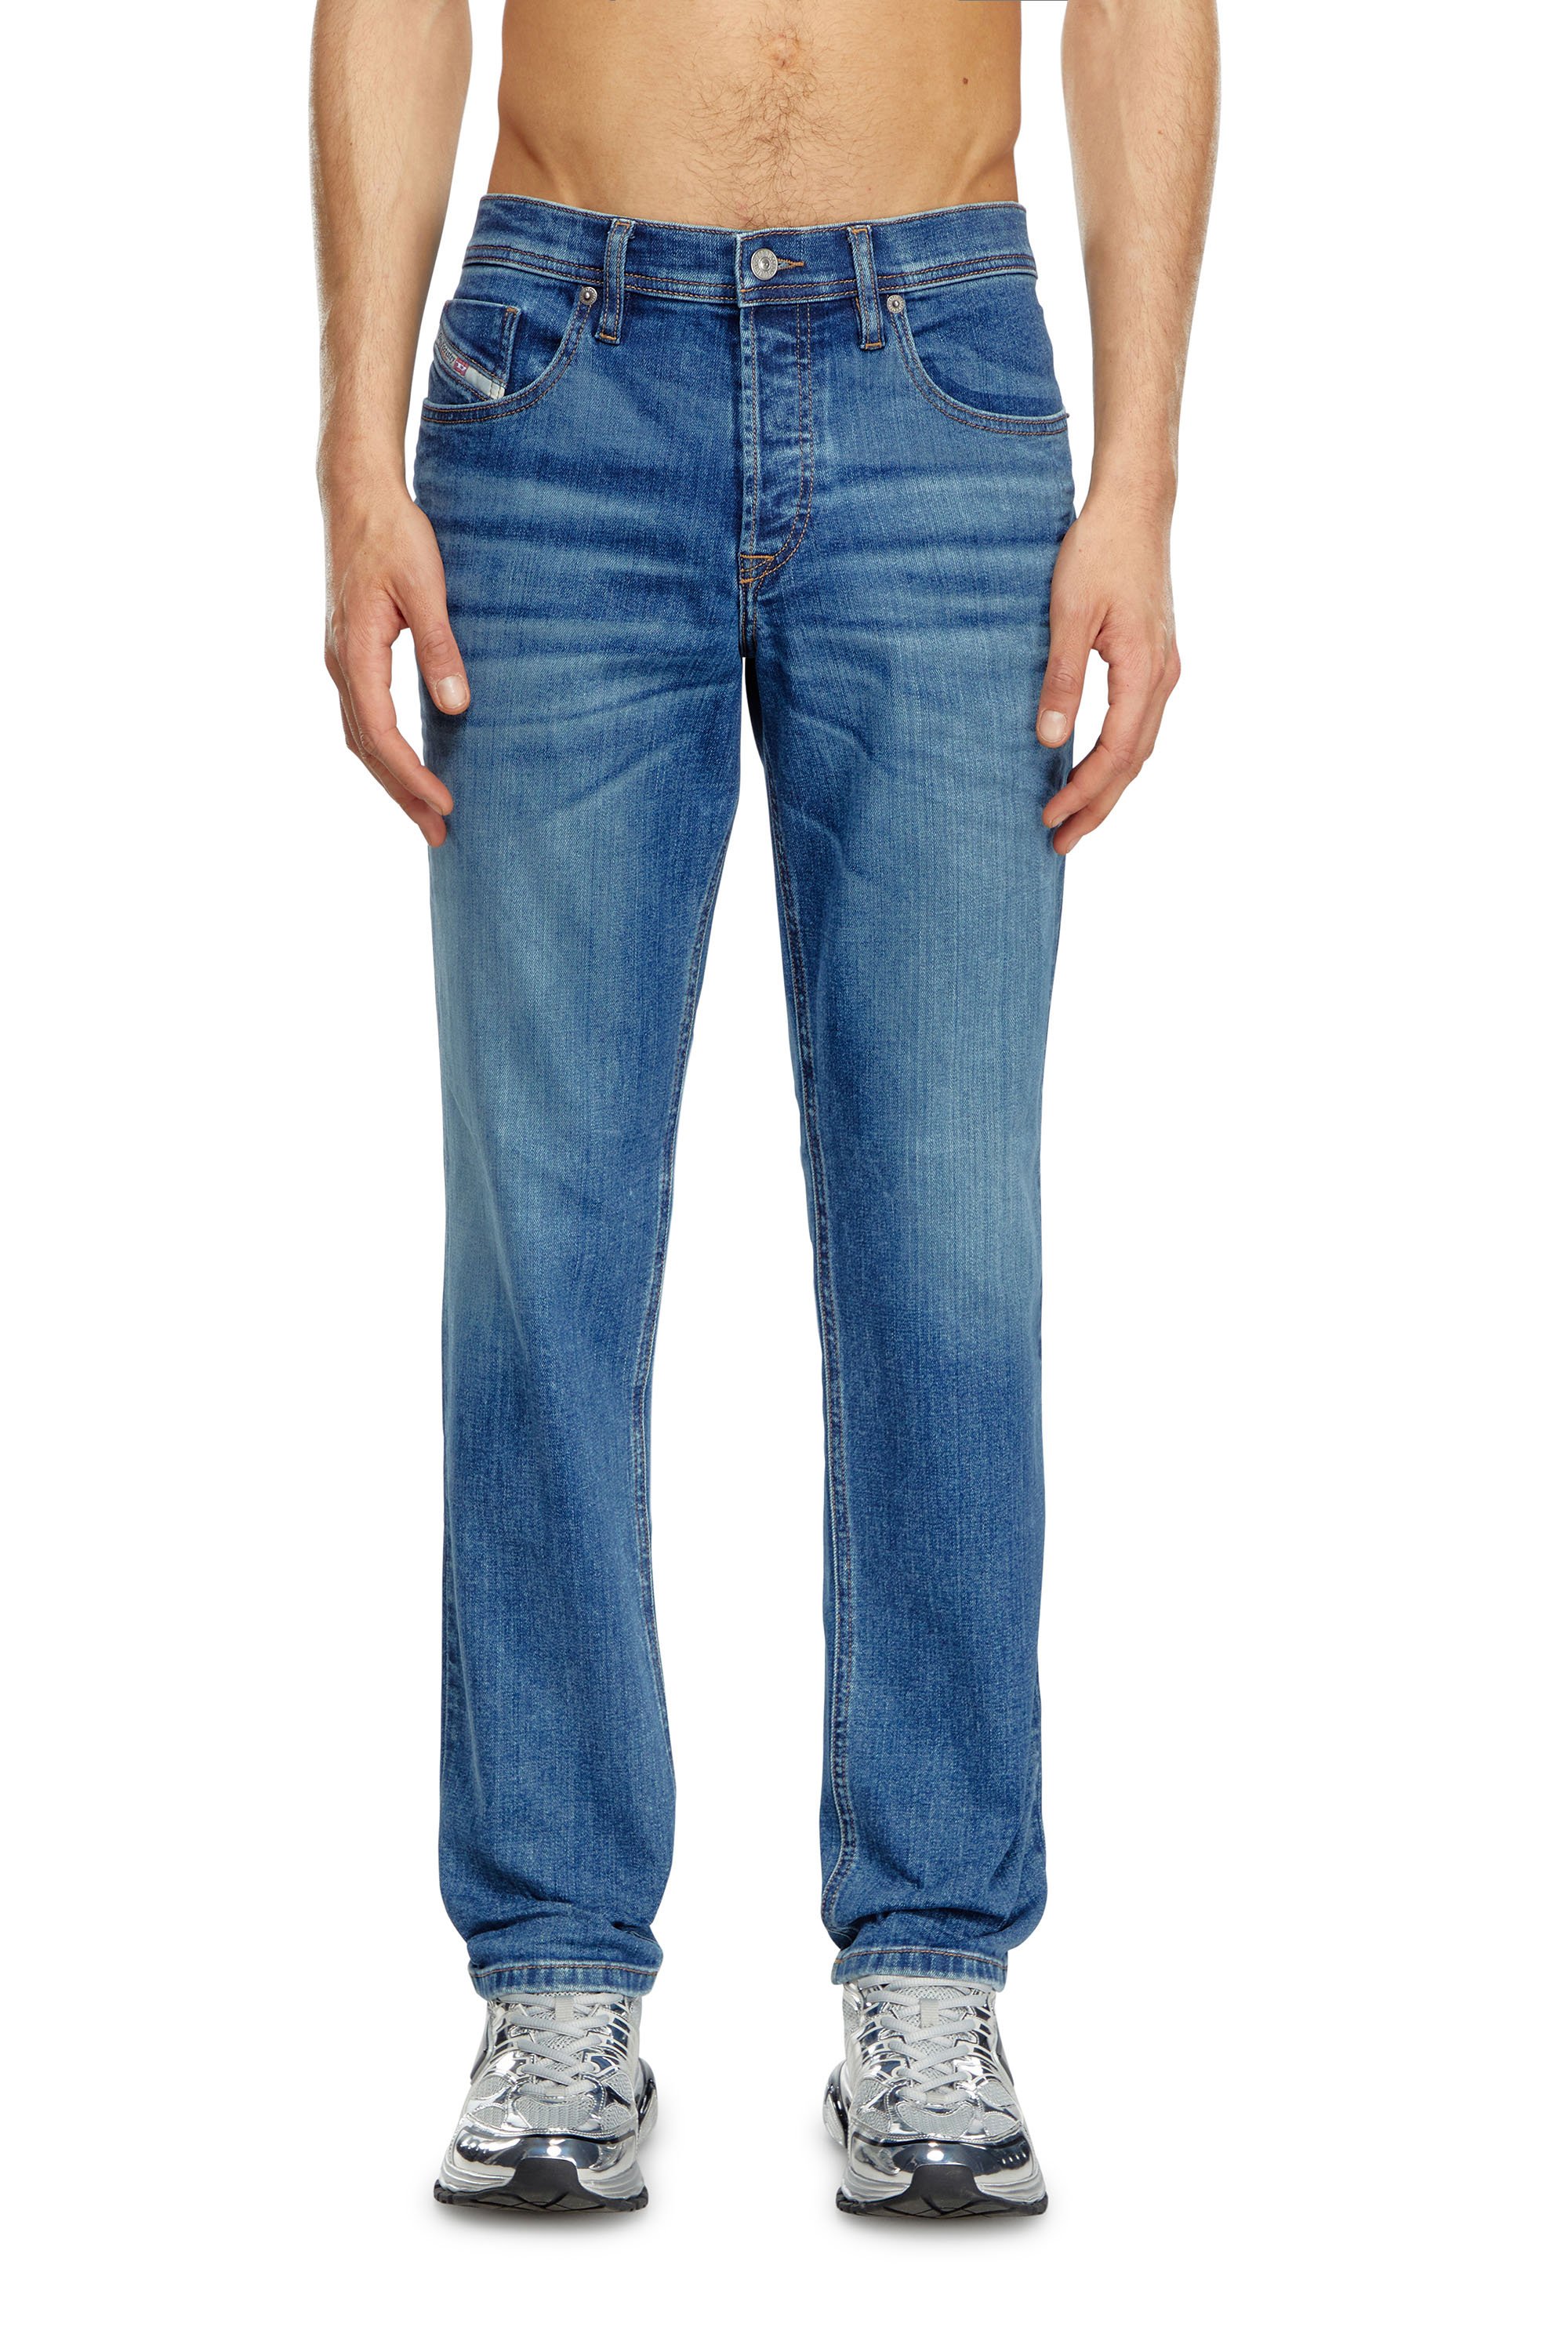 Diesel - Tapered Jeans 2023 D-Finitive 0GRDP, Hombre Tapered Jeans - 2023 D-Finitive in Azul marino - Image 1